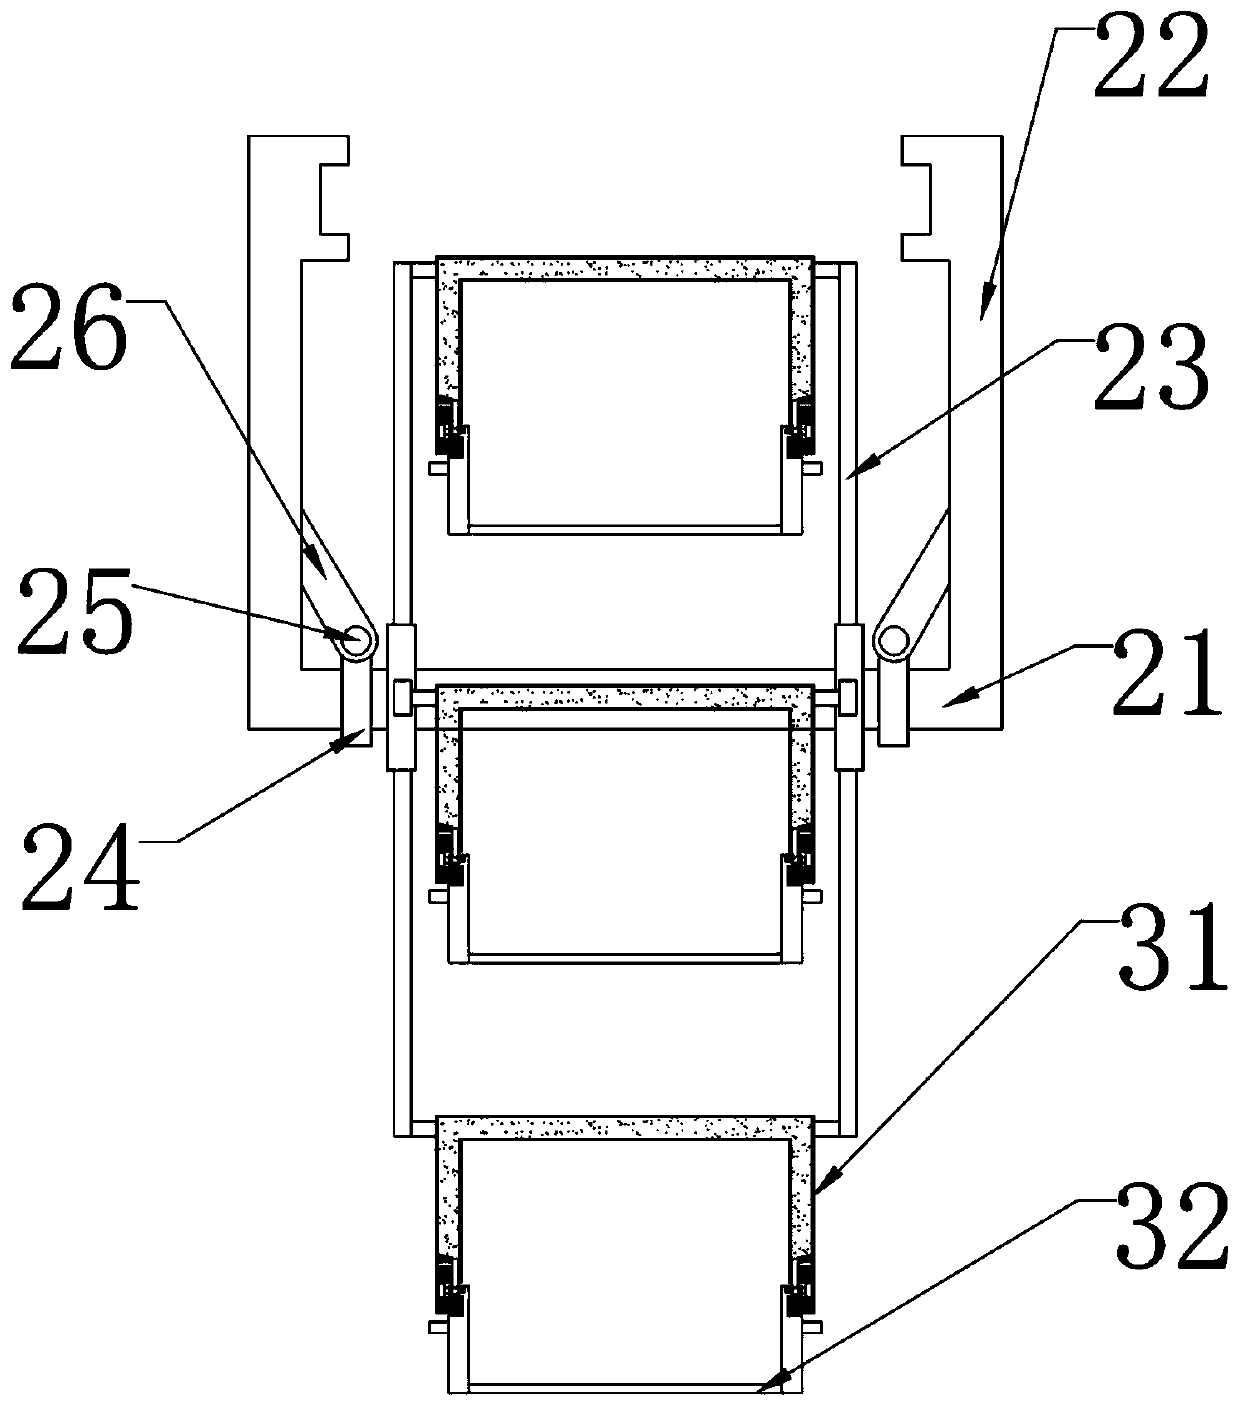 An indexable plate lifting supply system